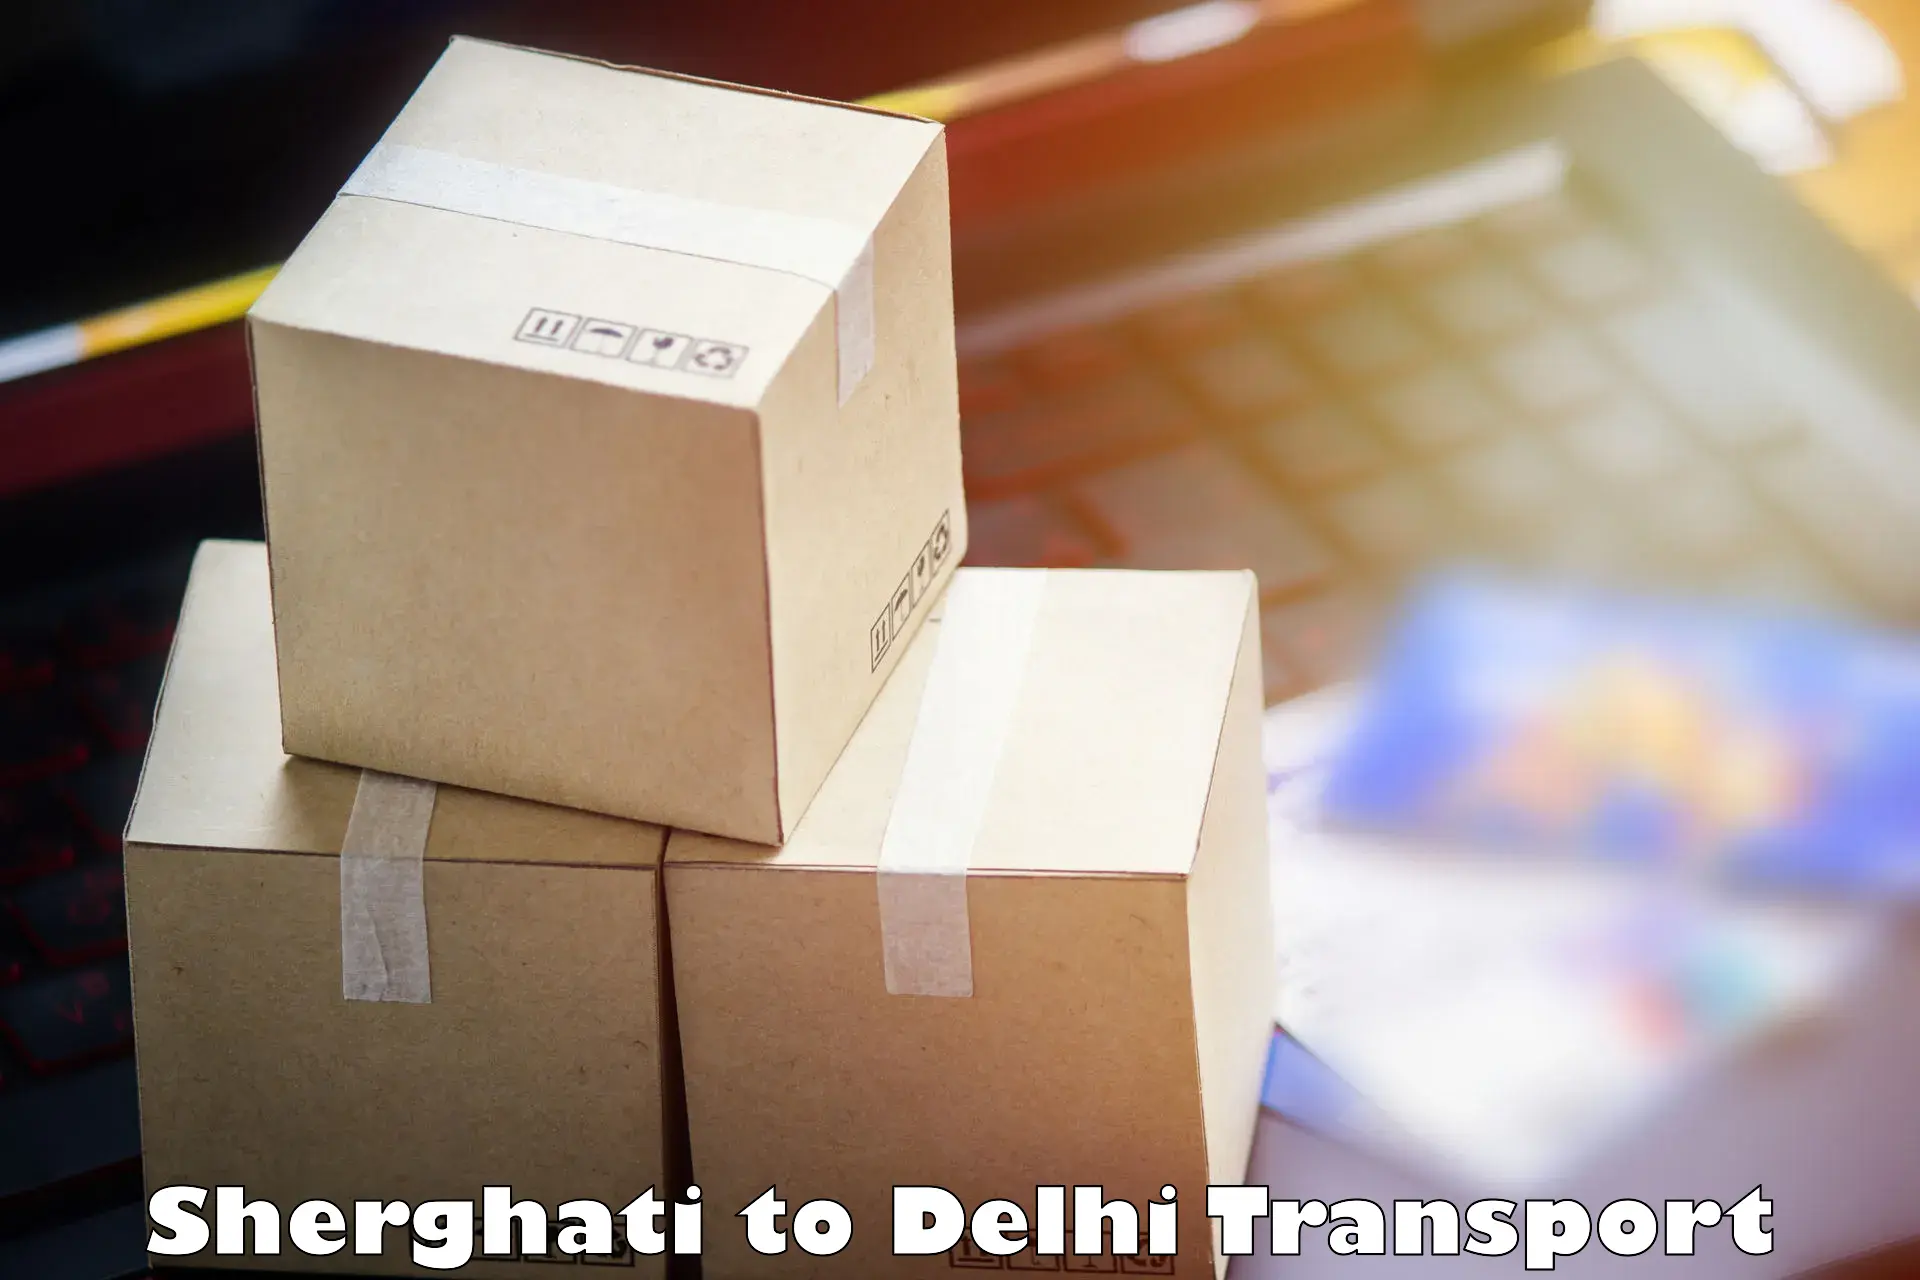 Transport shared services Sherghati to Indraprastha